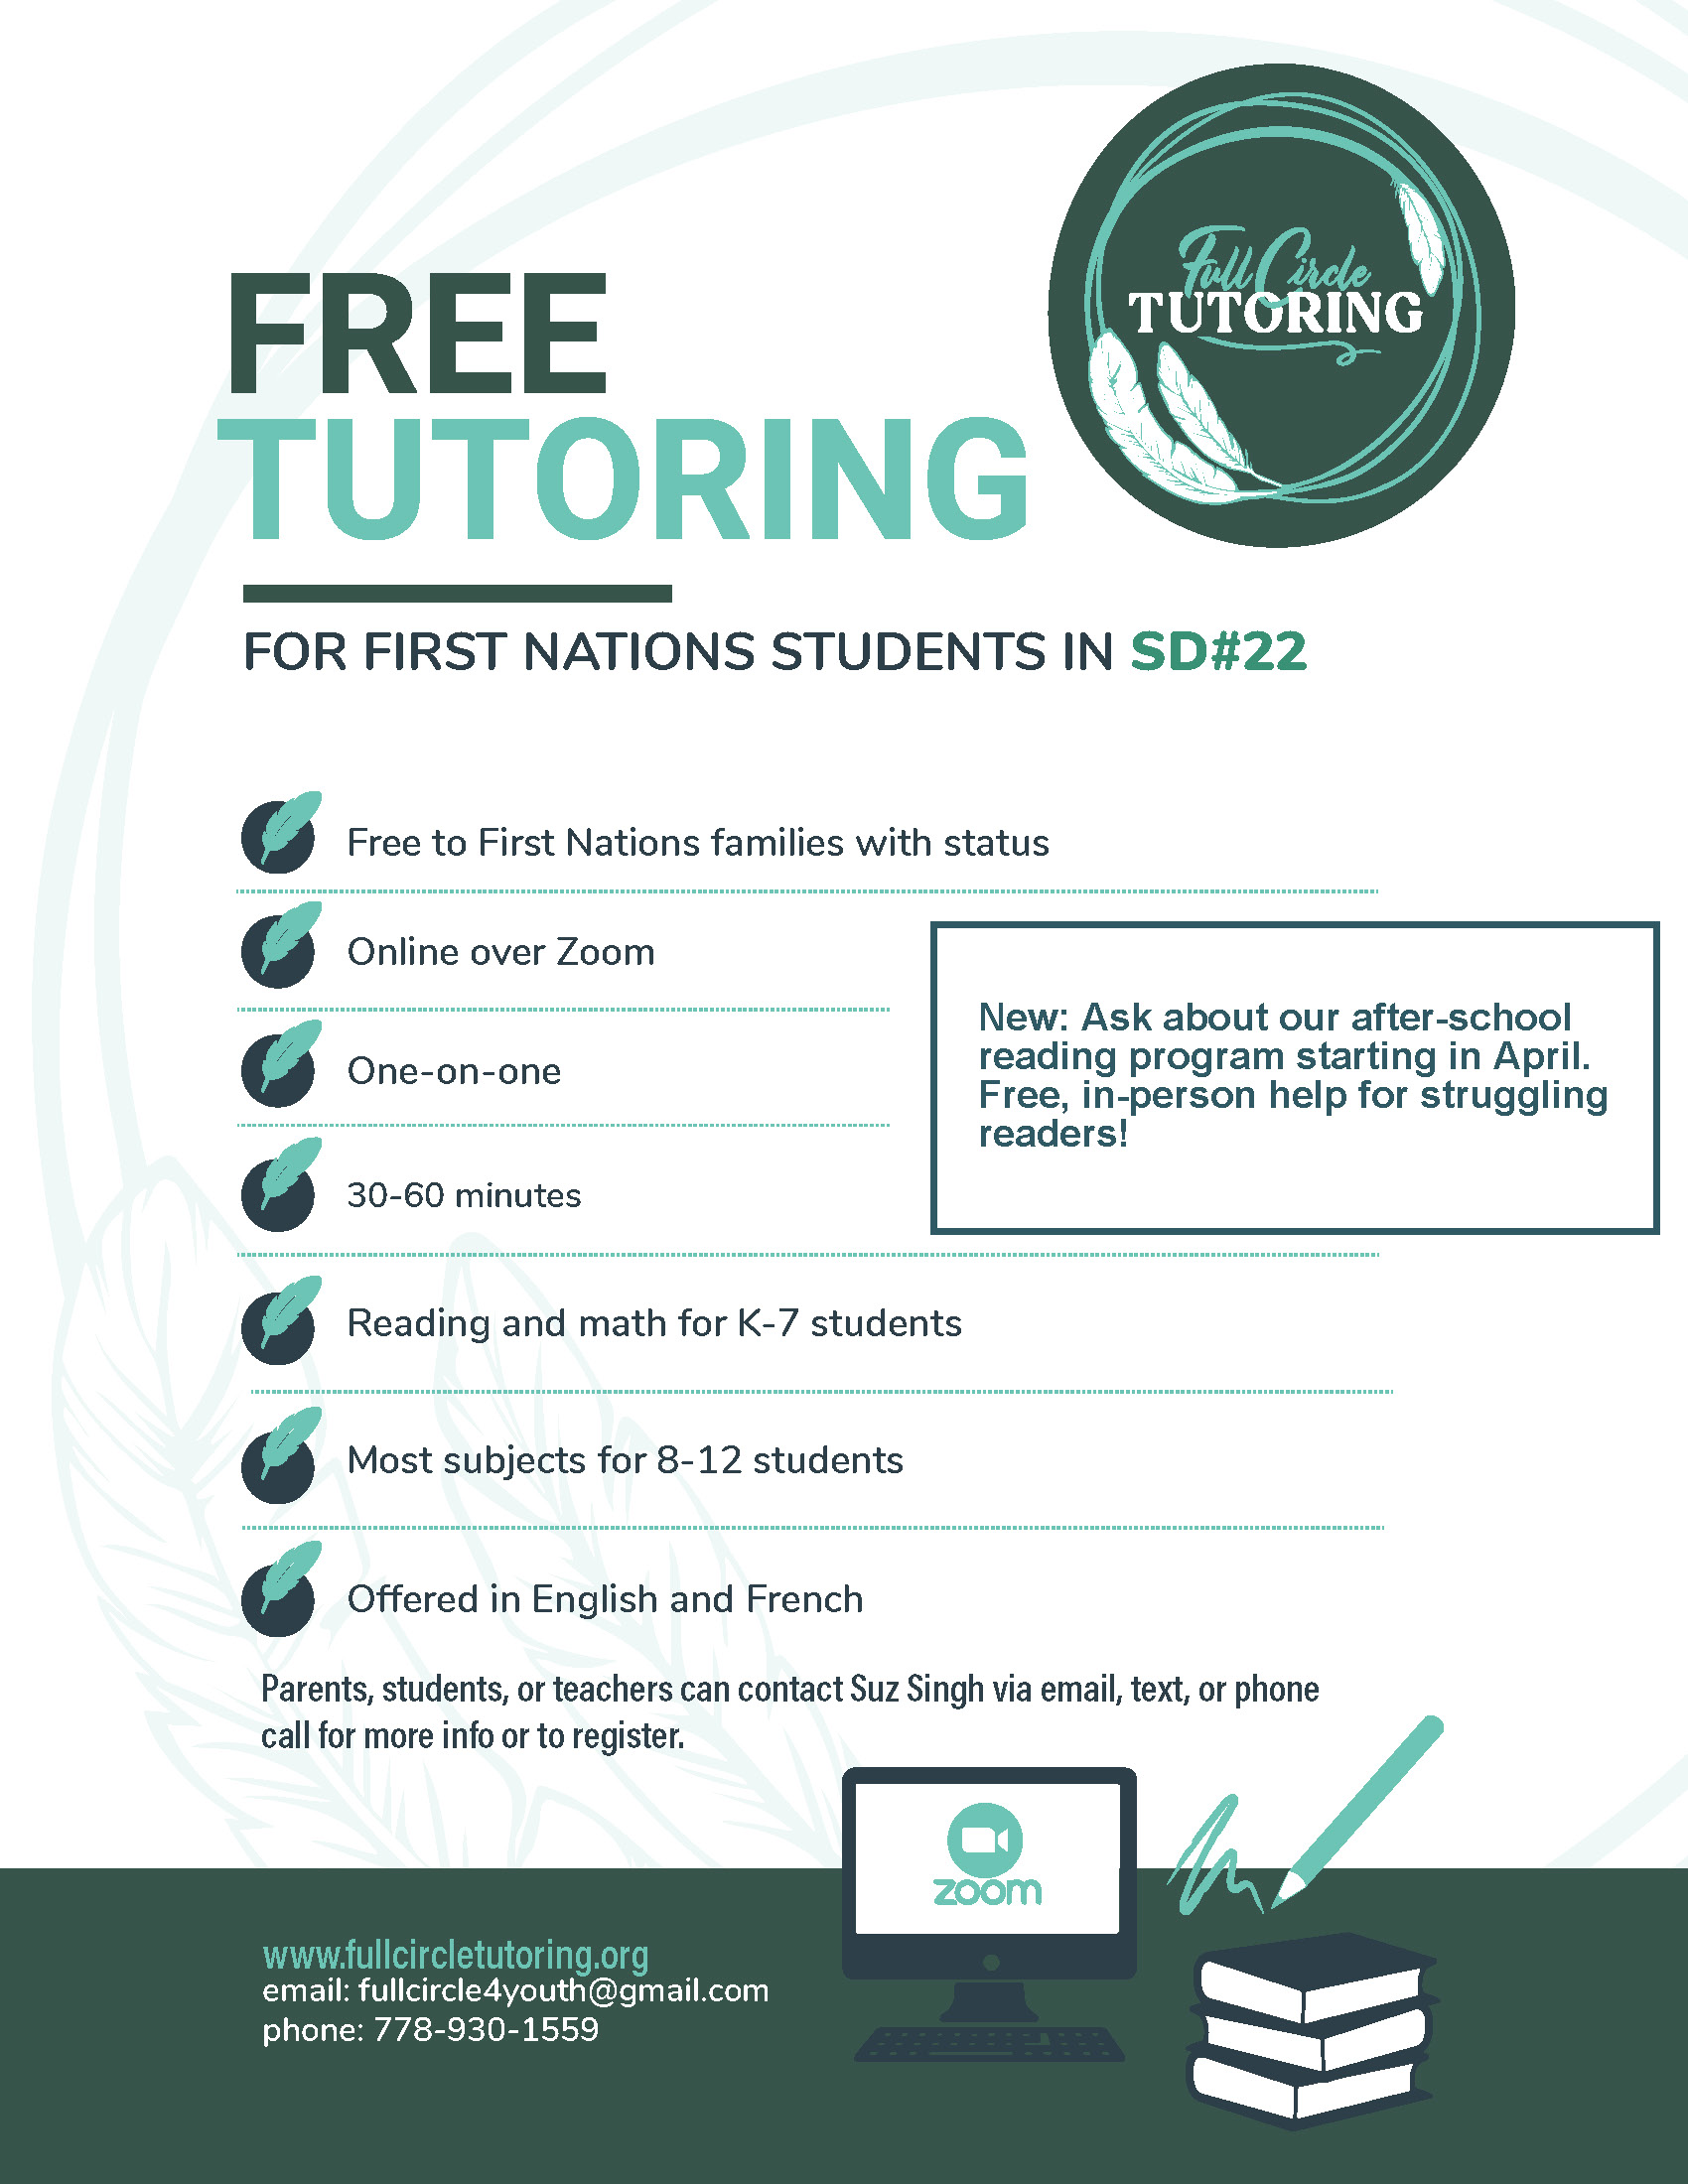 Free Tutoring for First Nations students in SD22